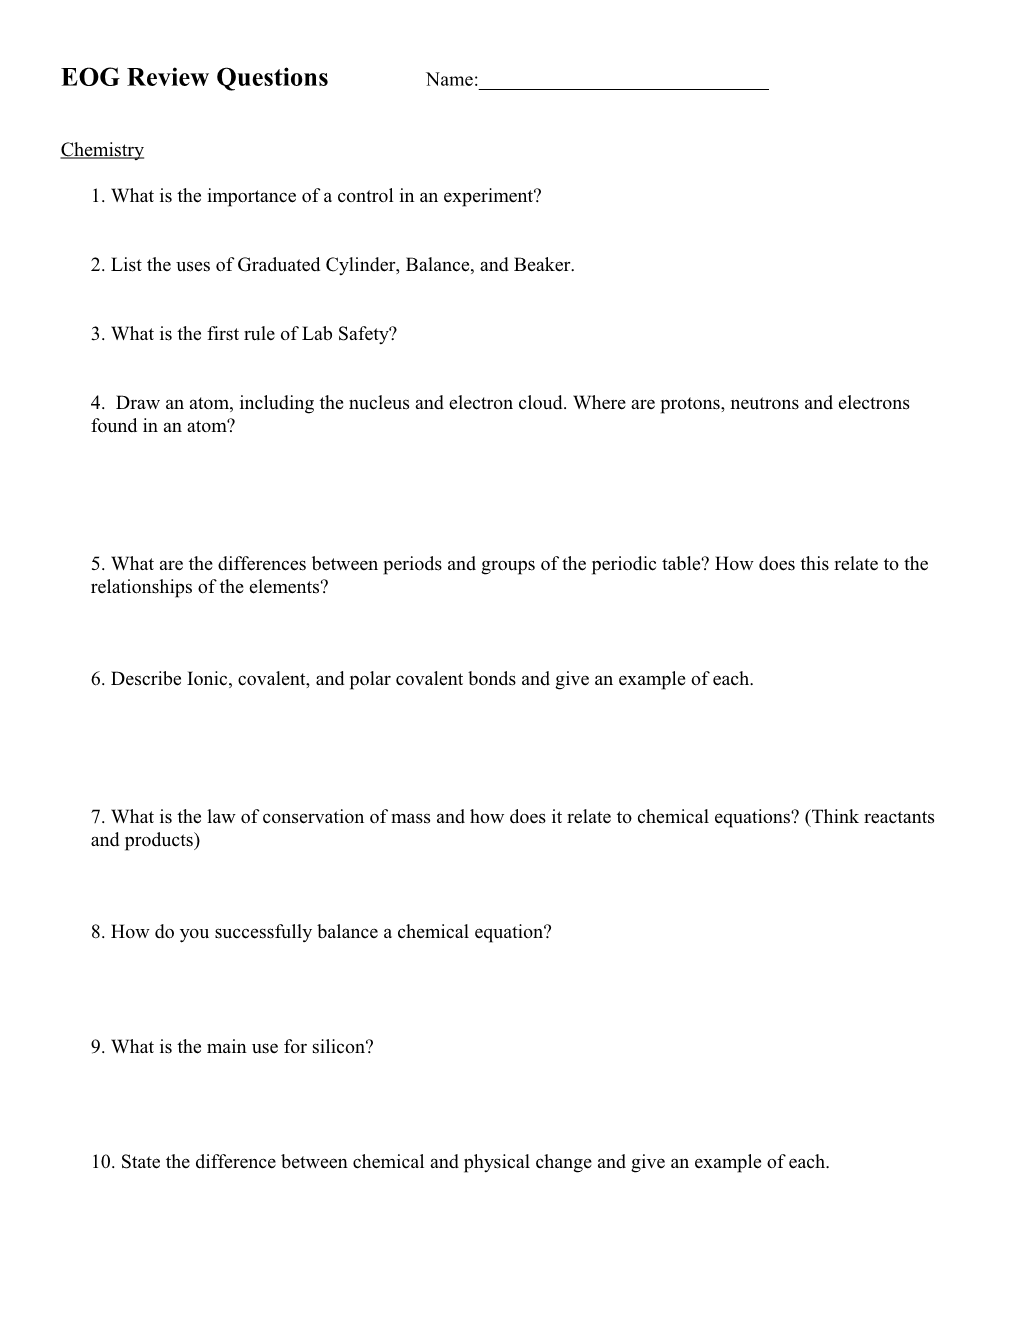 EOG Review Questions and Answers